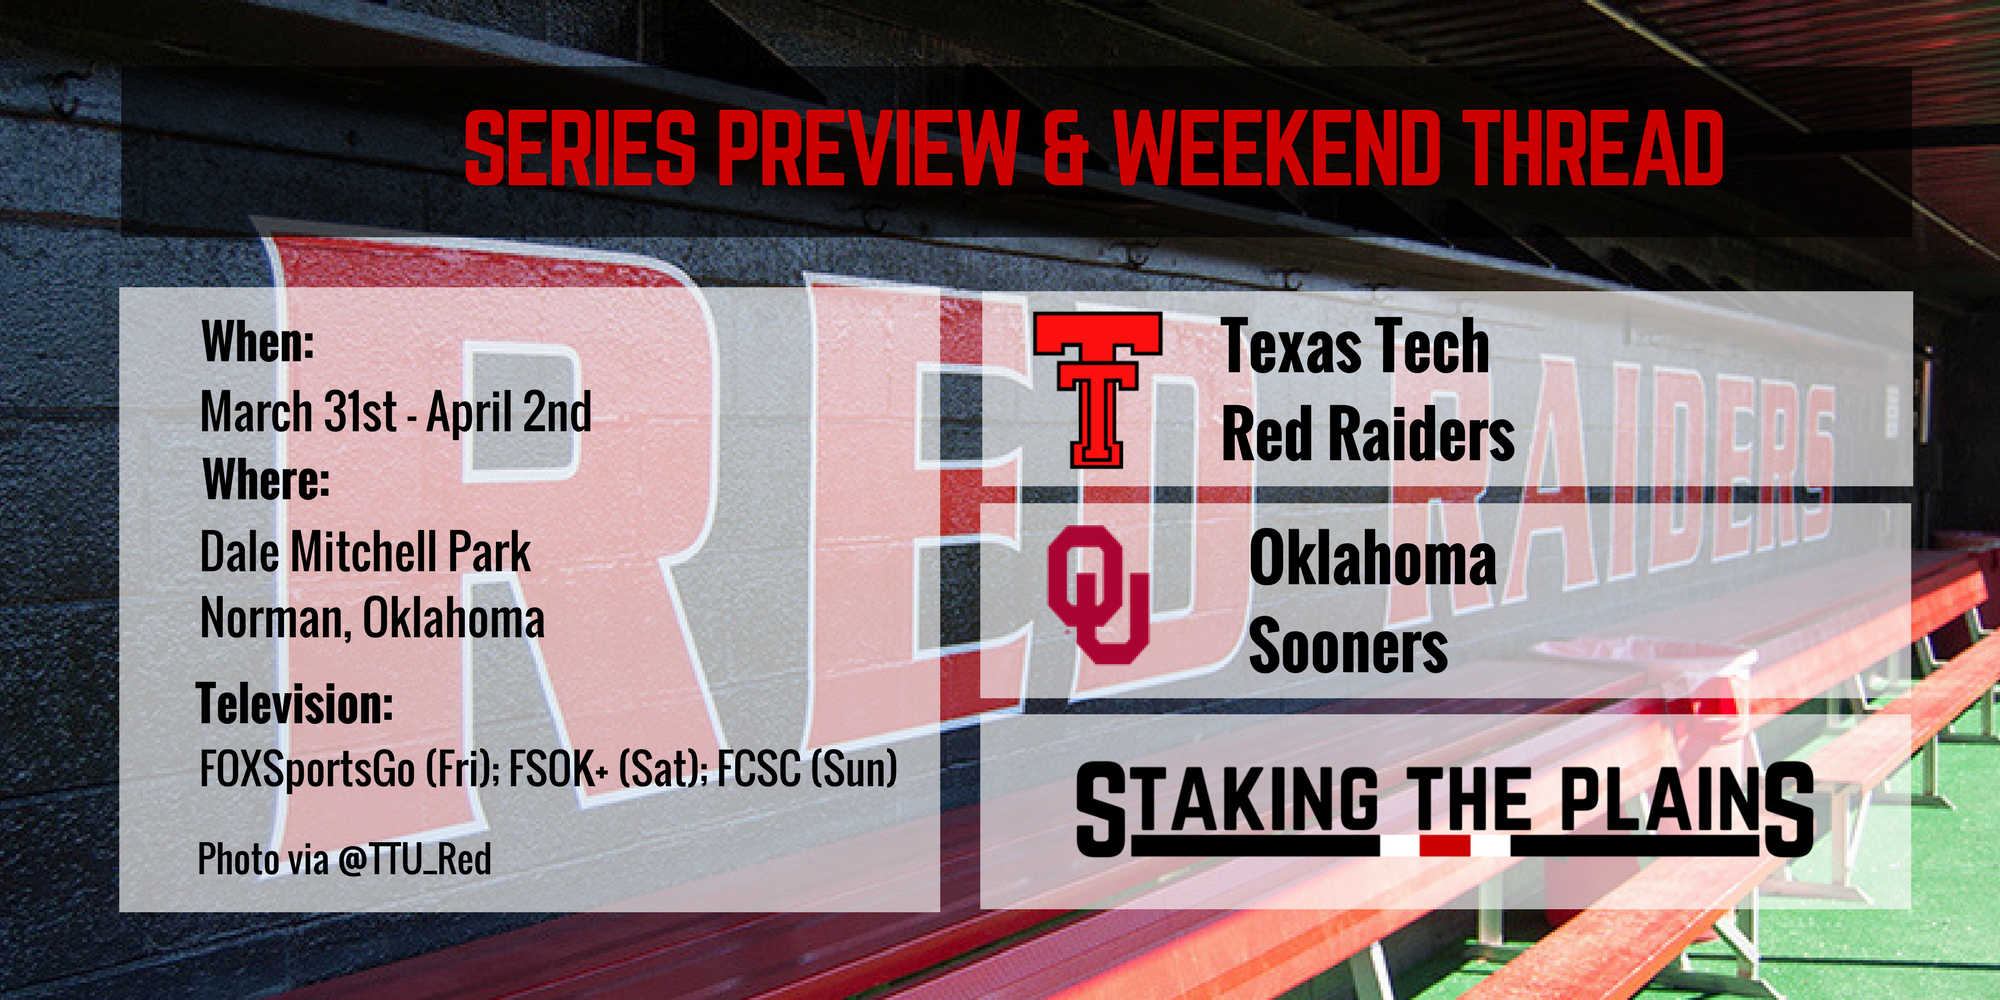 Series Preview and Weekend Thread: Texas Tech vs. Oklahoma